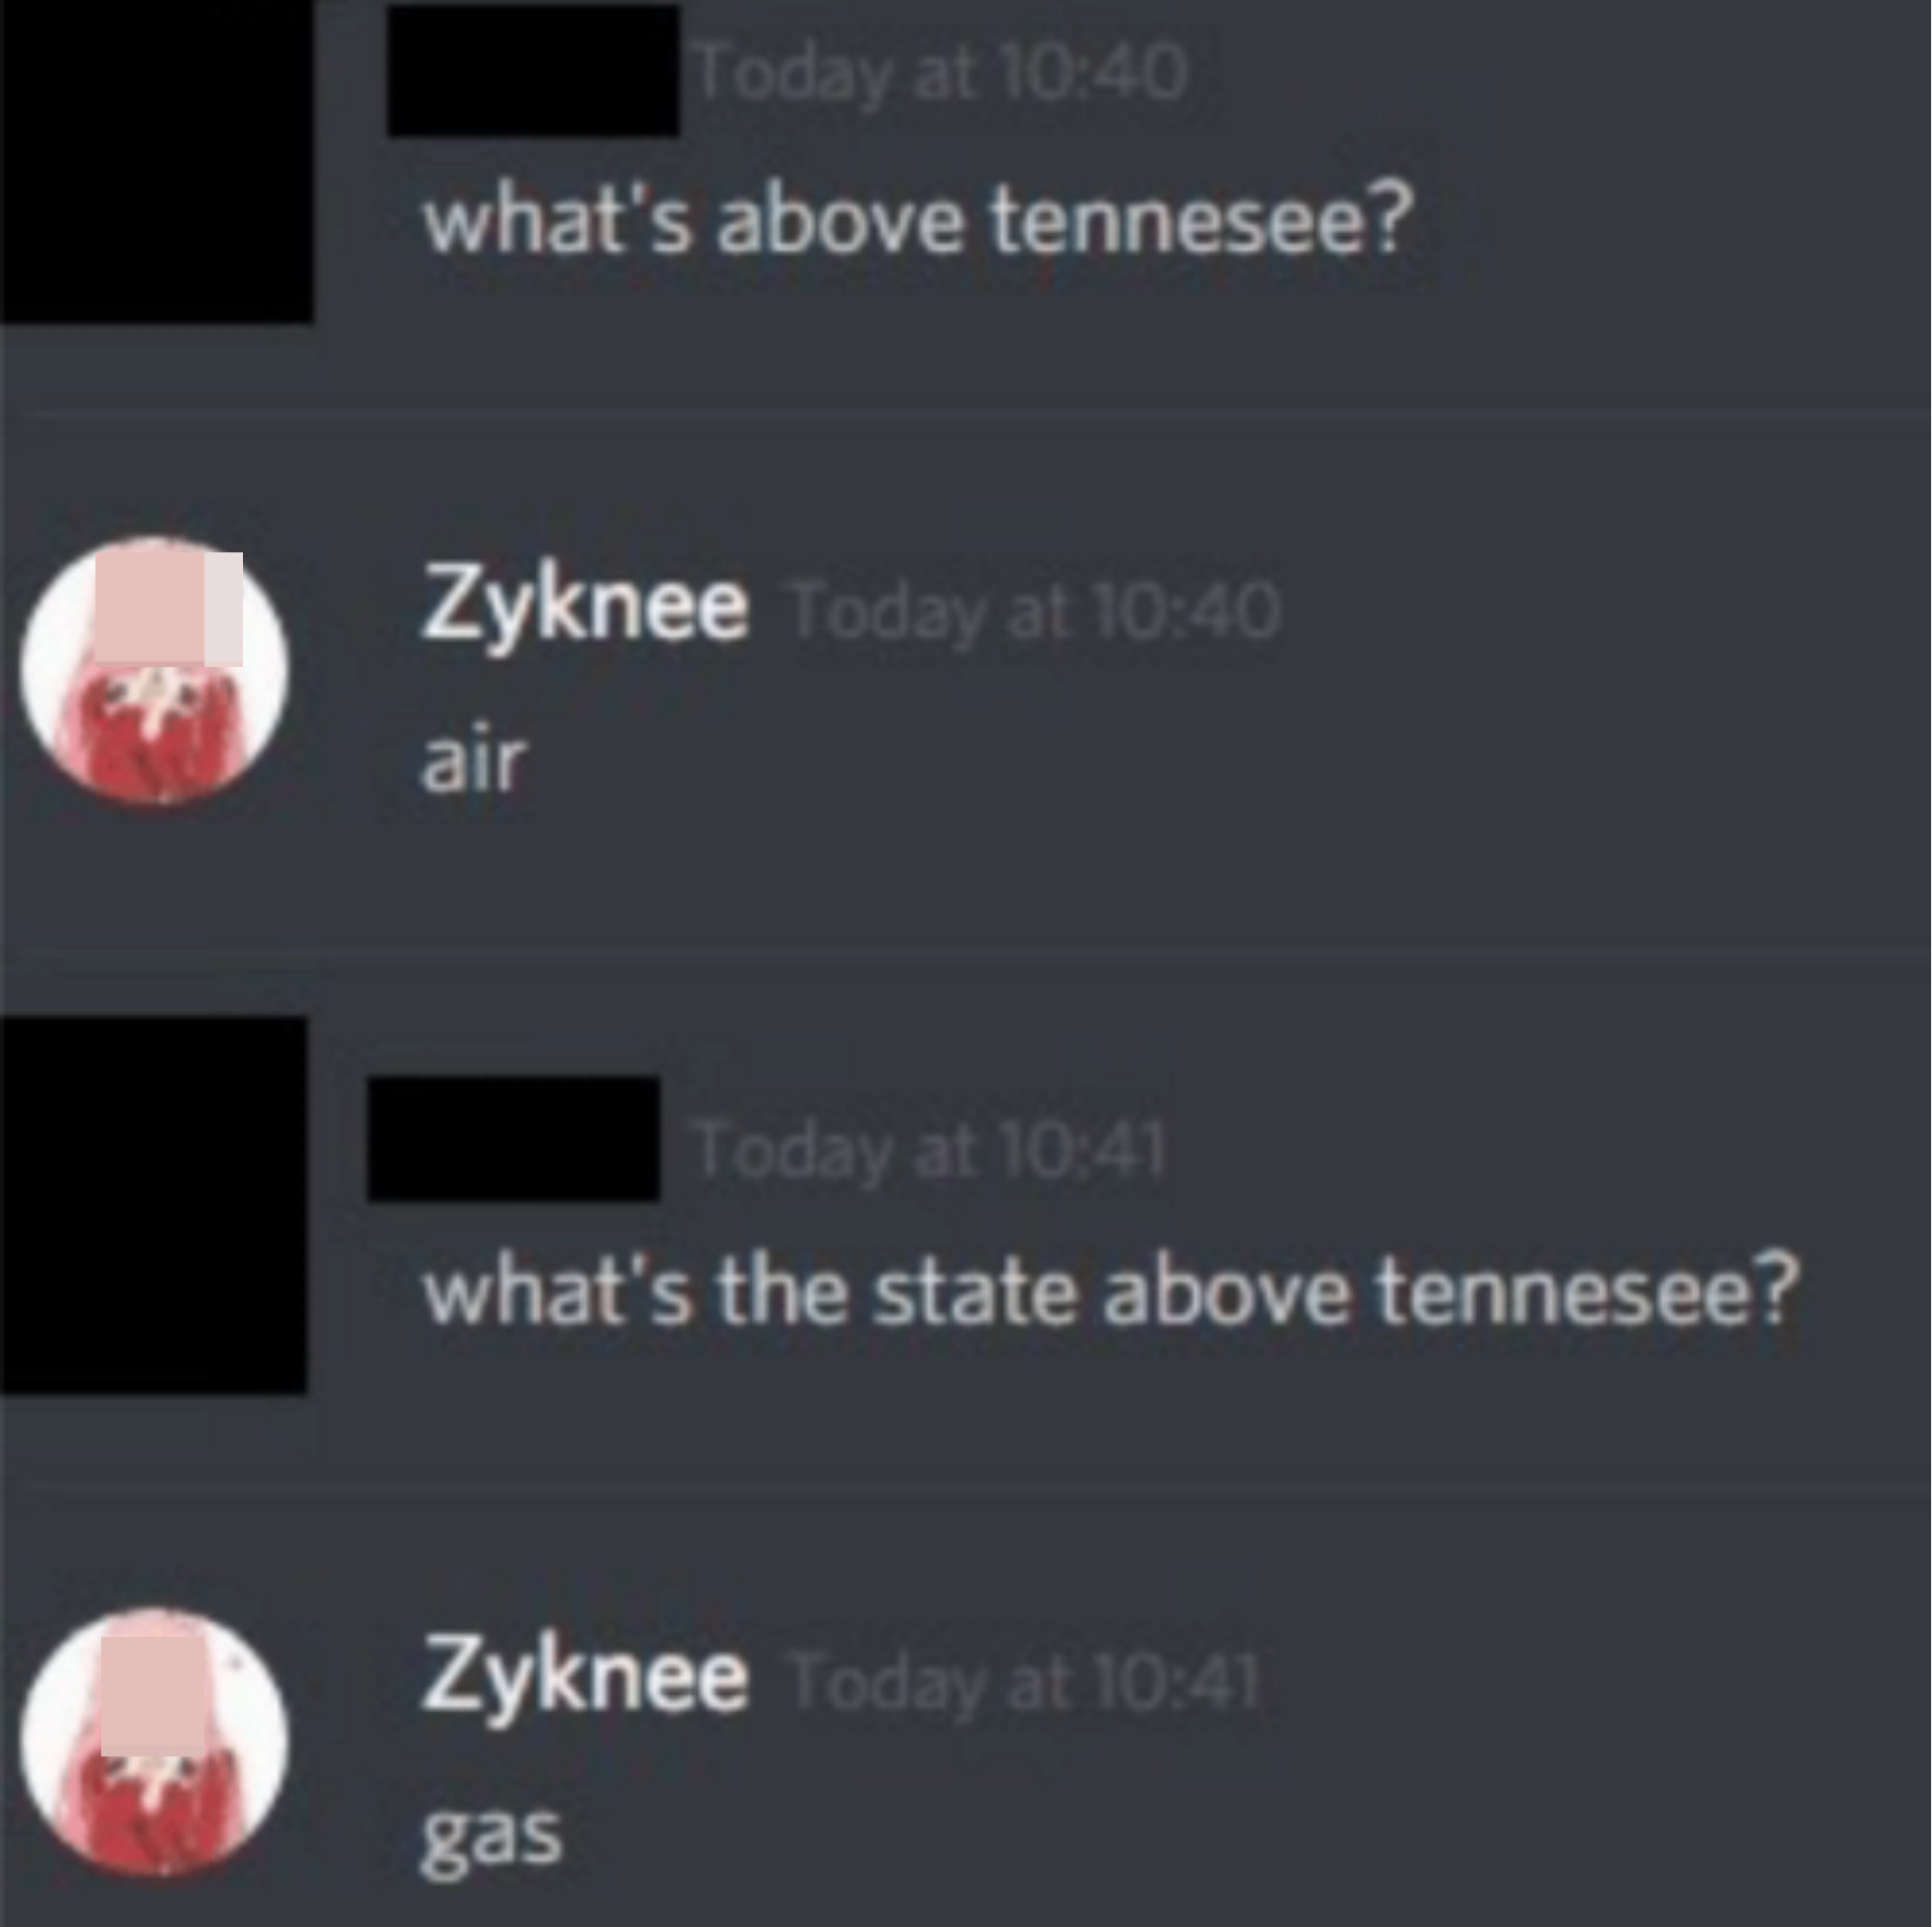 A person asking what state is above Tennessee and someone replies &quot;gas&quot;